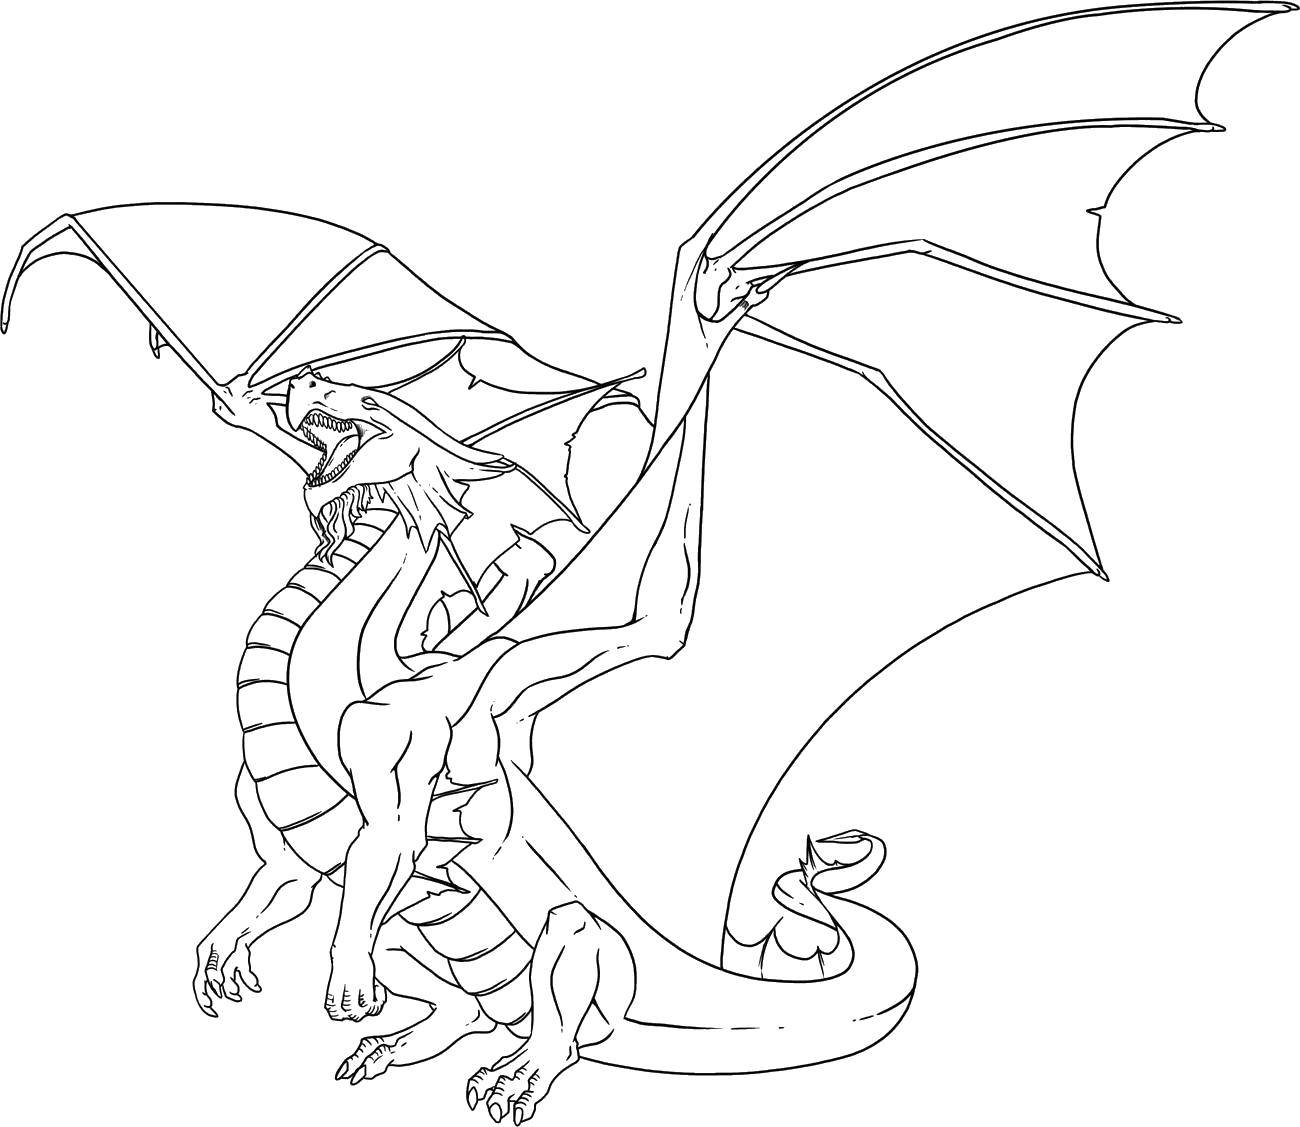 Coloring Aggression. Category Dragons. Tags:  Dragons.